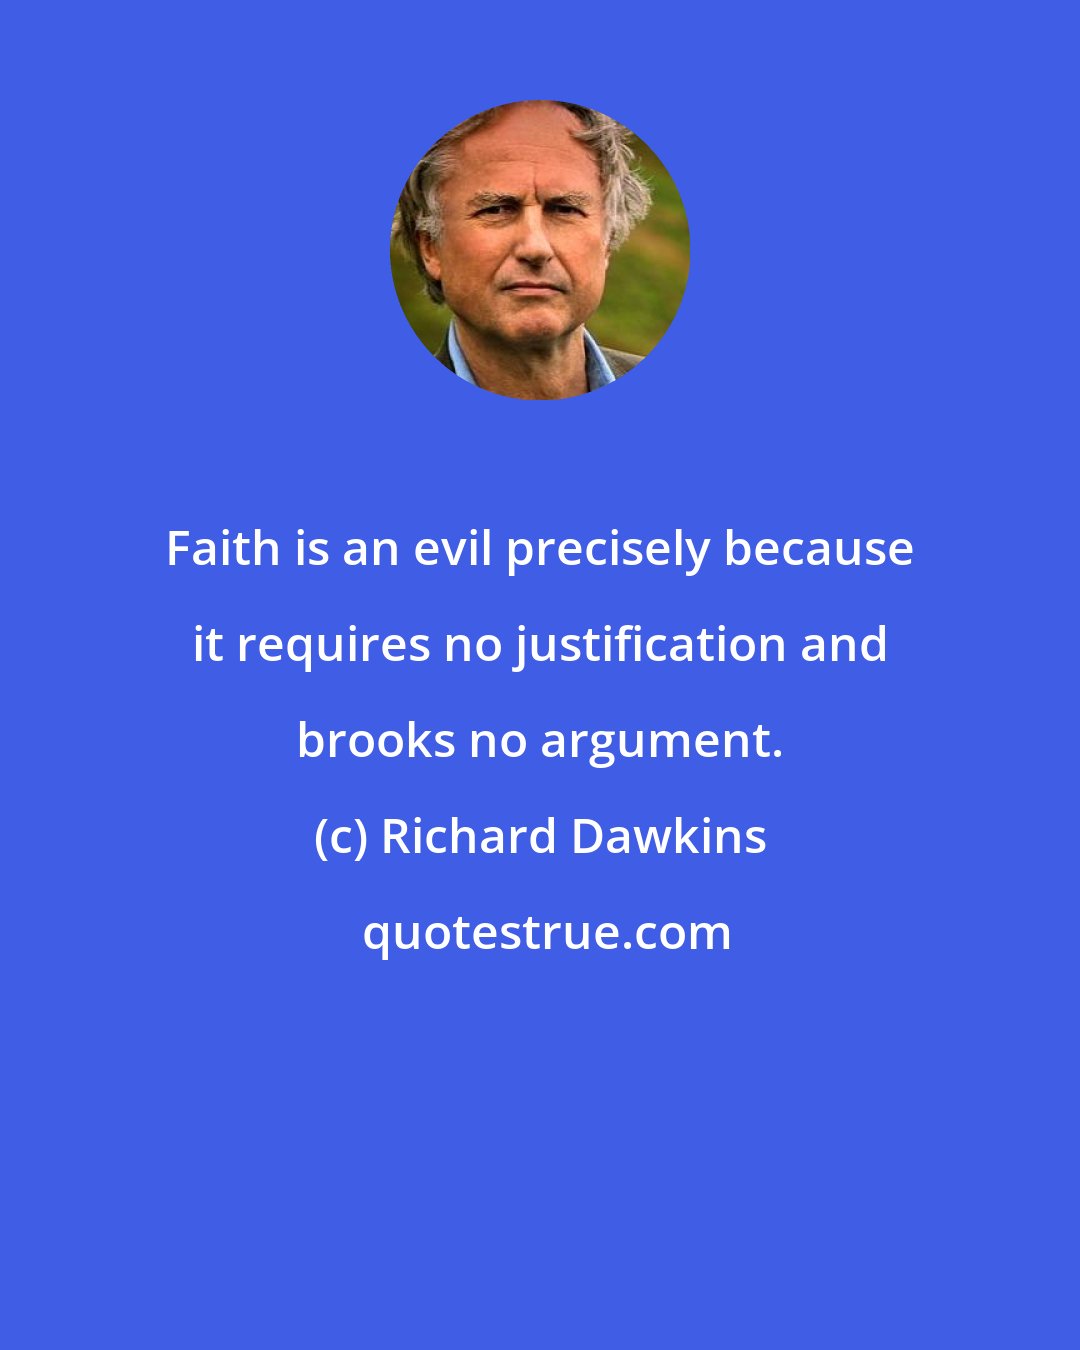 Richard Dawkins: Faith is an evil precisely because it requires no justification and brooks no argument.